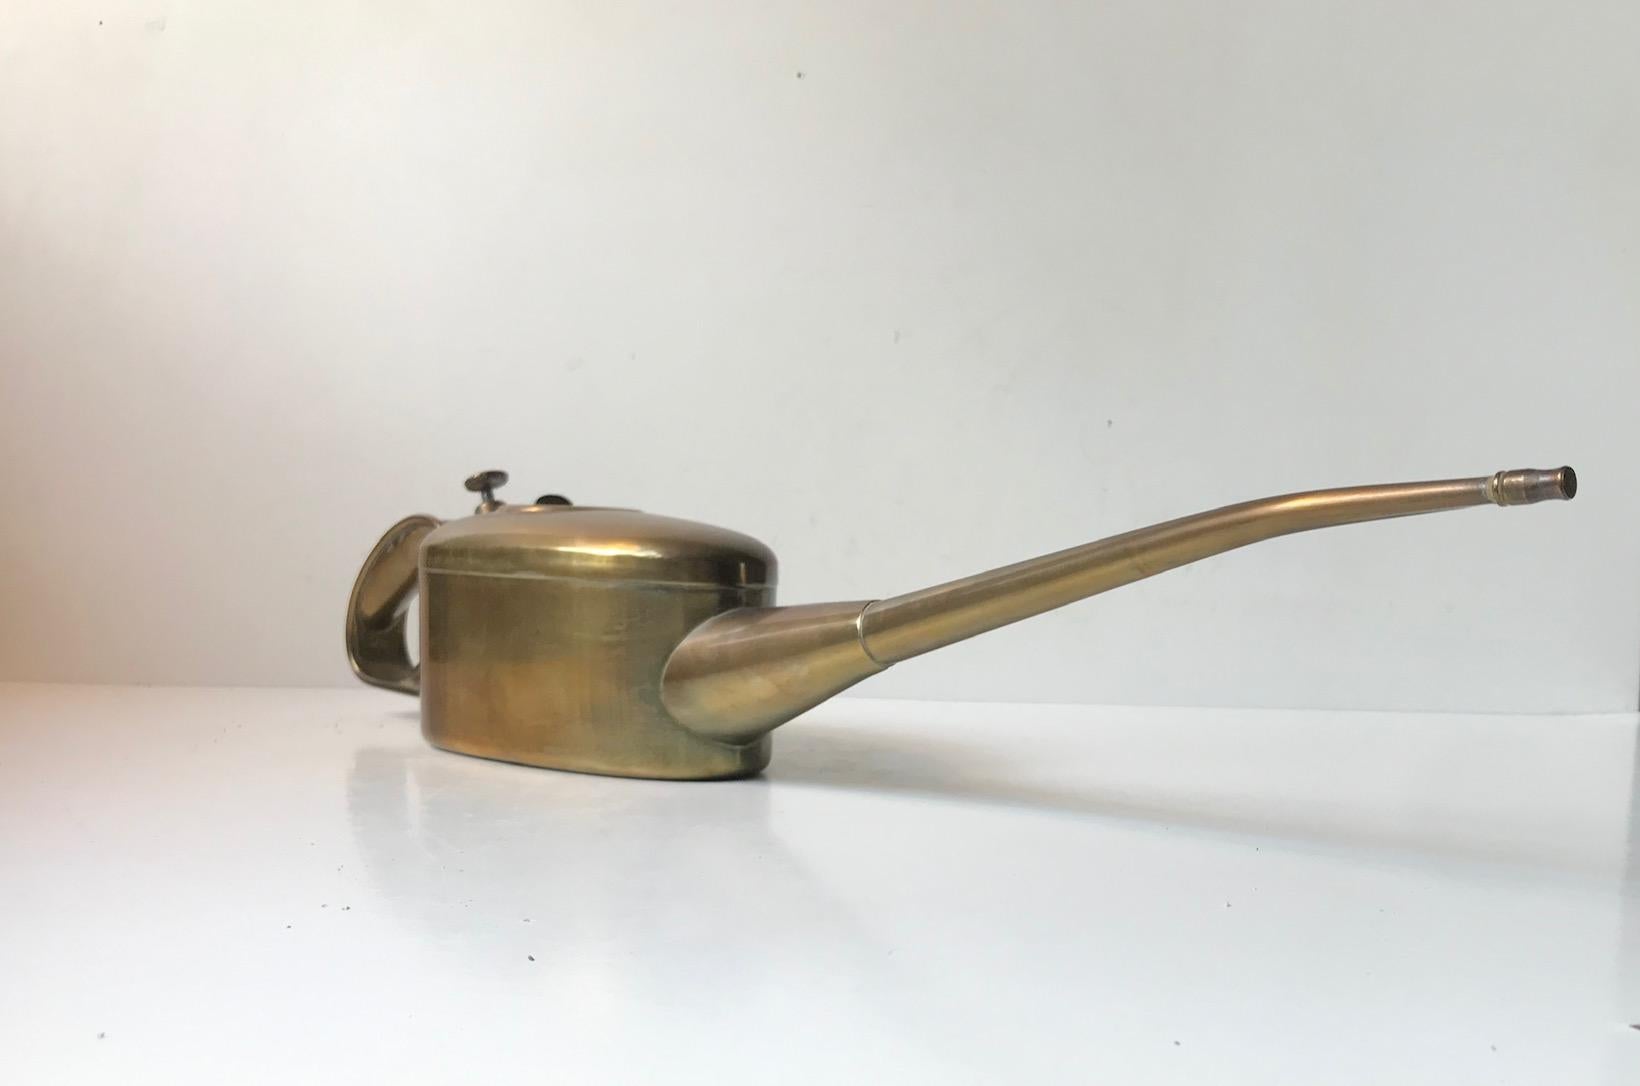 Unusually well kept oiler - oil pump can. Every piece and component is made from solid brass. Unknown provenance but its probably a maritime object, either German or English, and made during the 1920s or 1930s. It has no dents and is mechanical in